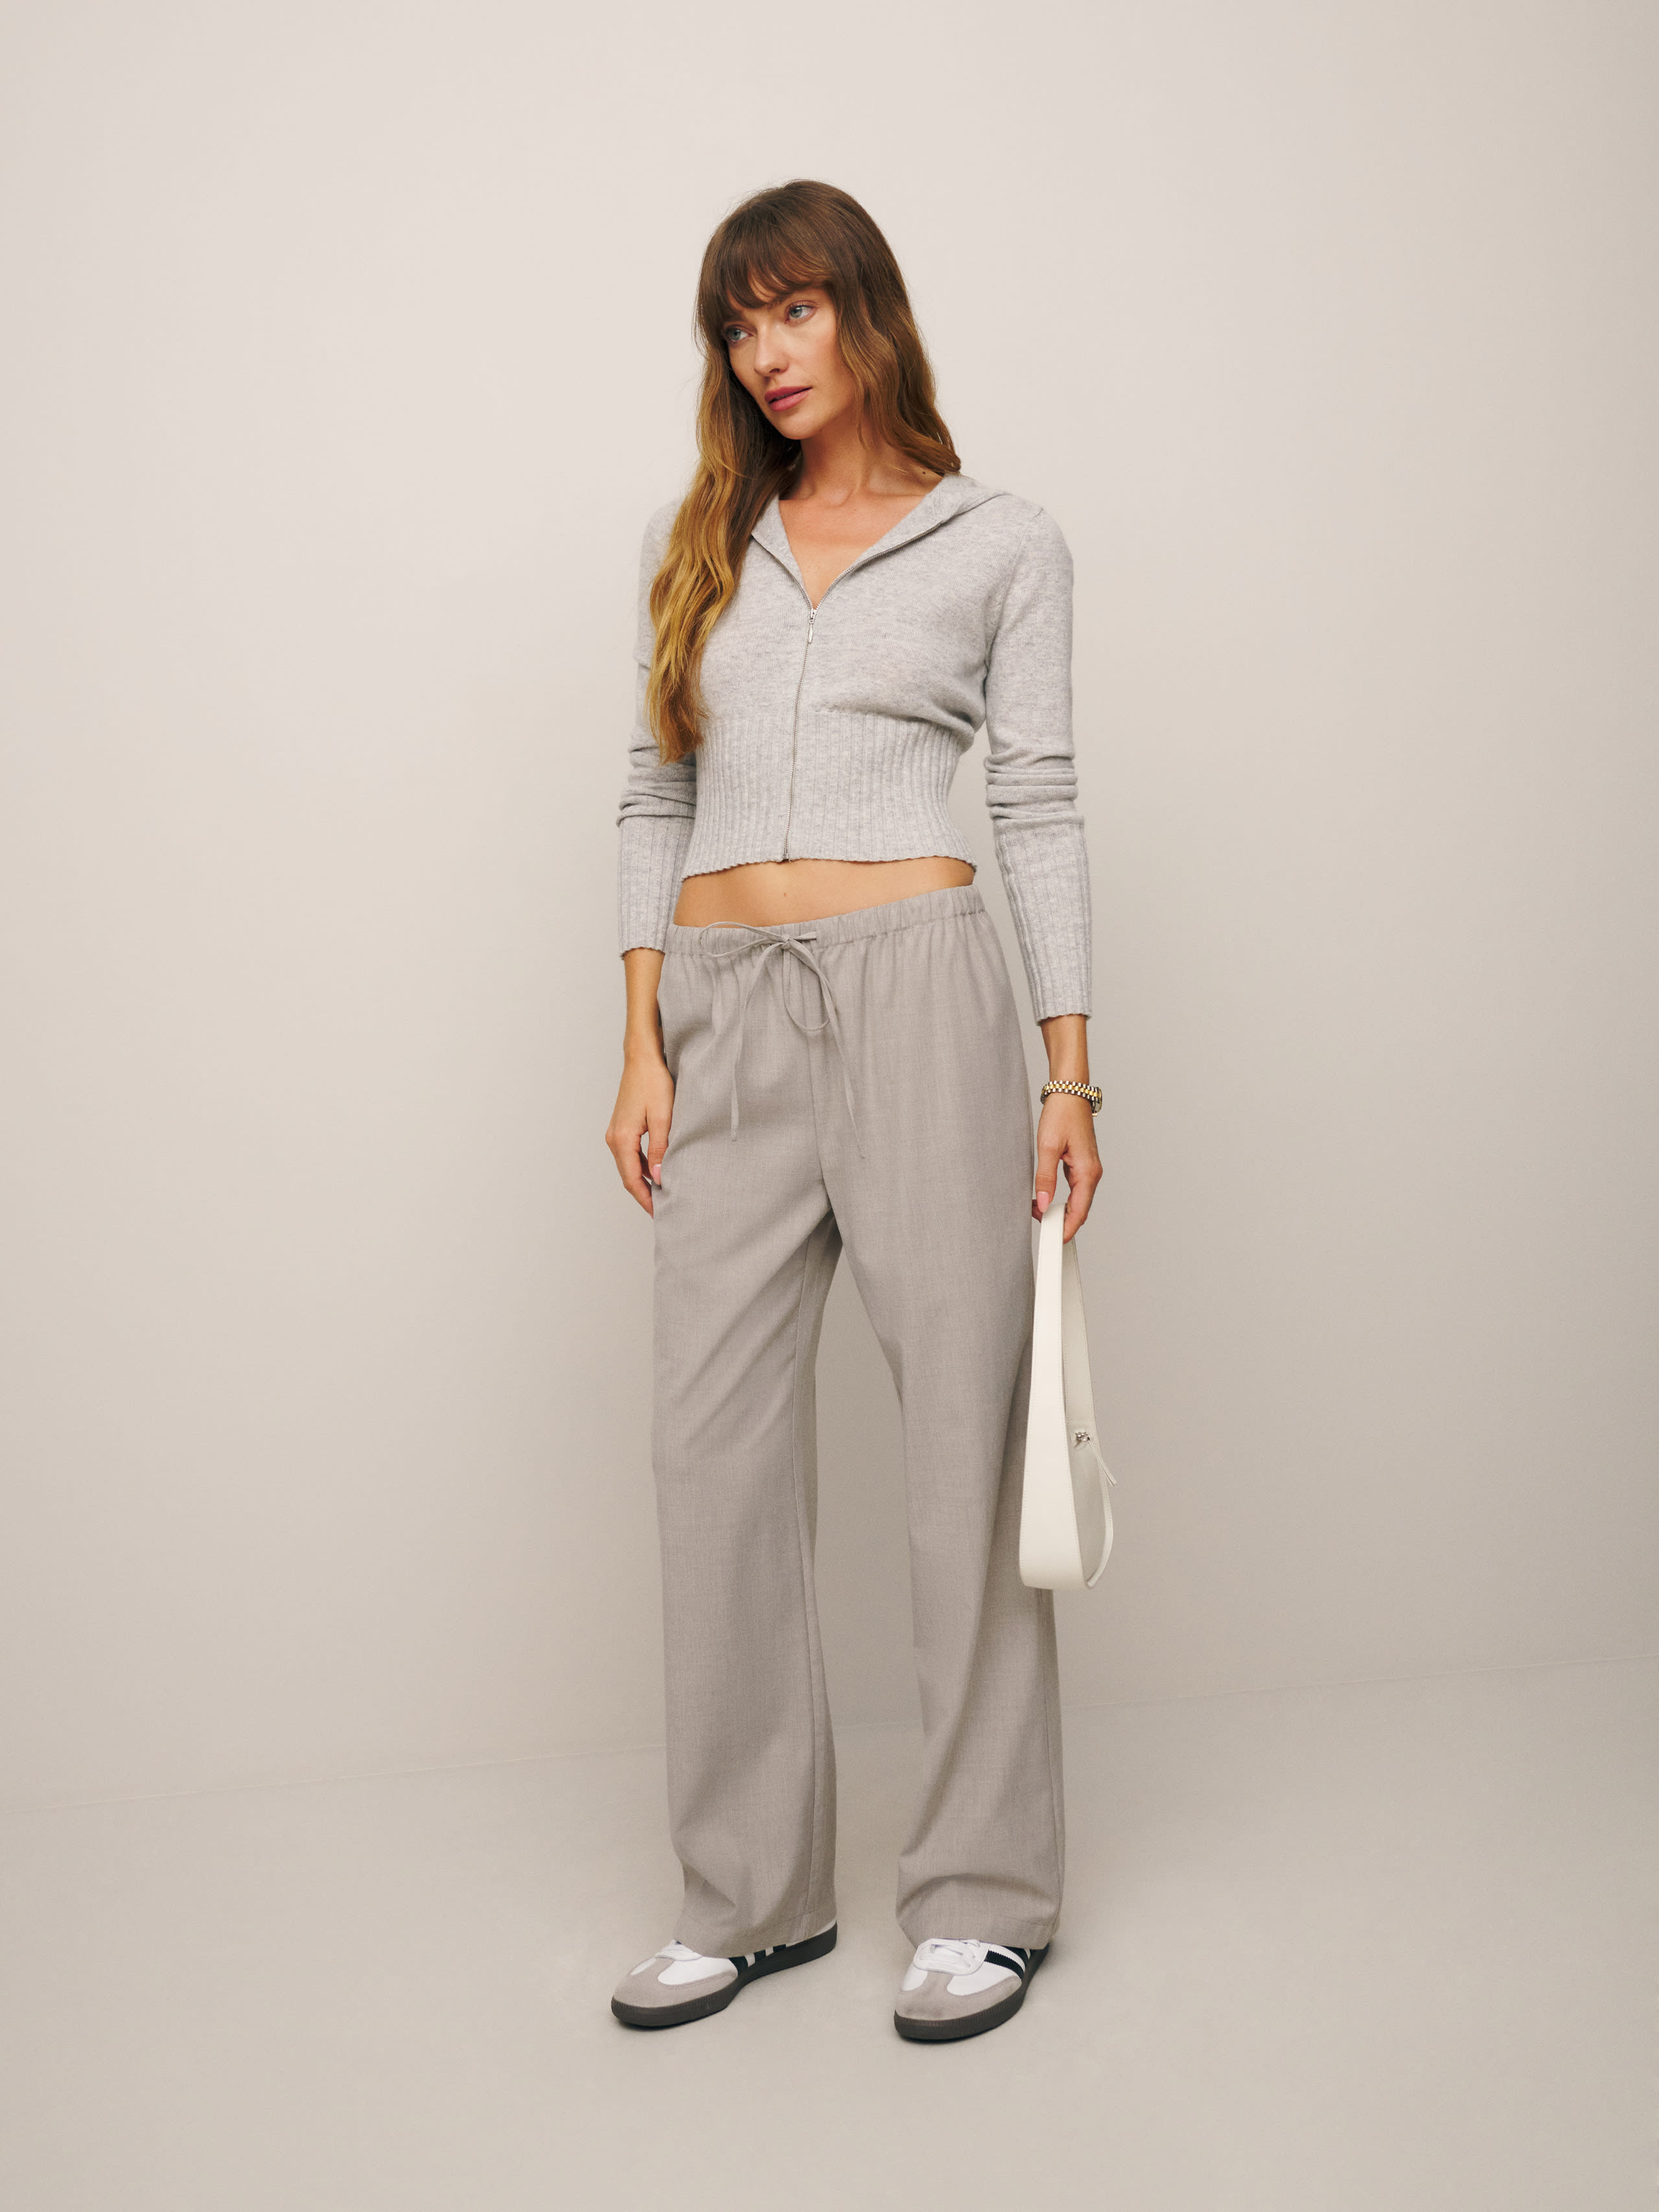 Reformation Olina Pant In Natural